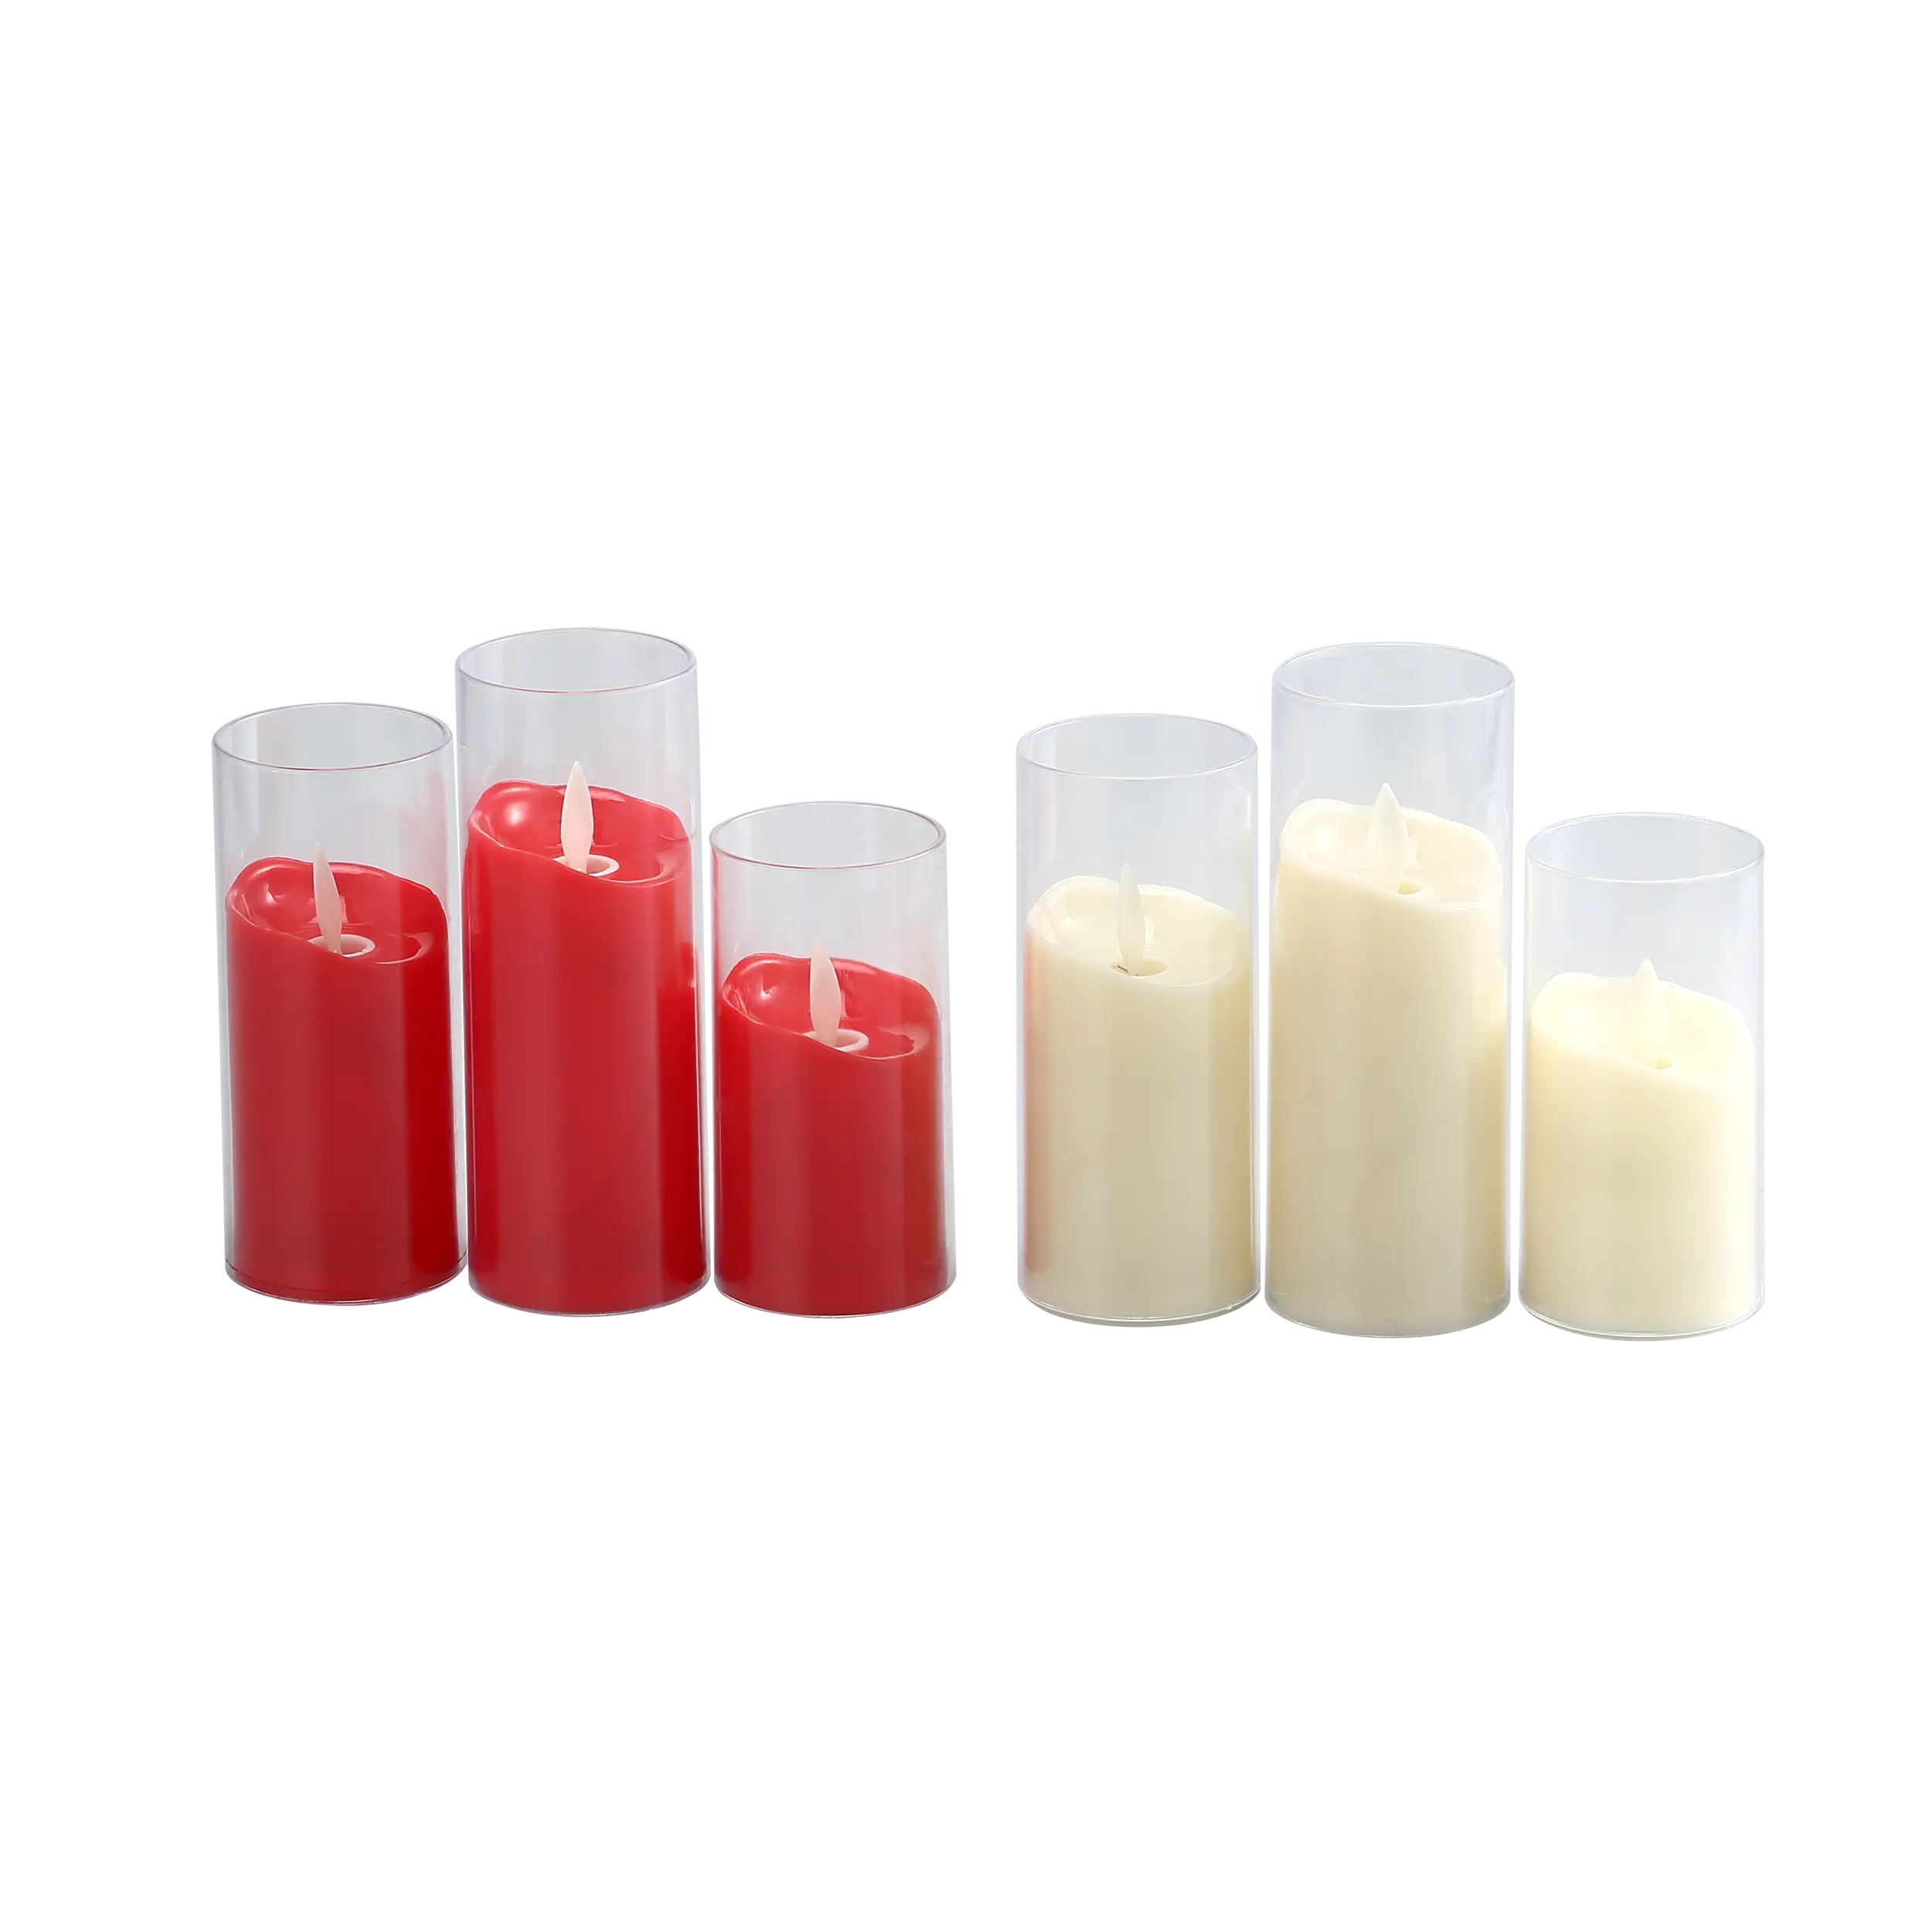 china Plastic Candles Cemetery Candles Monument Decoration Candles China Factory Aluminum Lanterns Good Friday Ritual Lanterns Cemetery Decoration